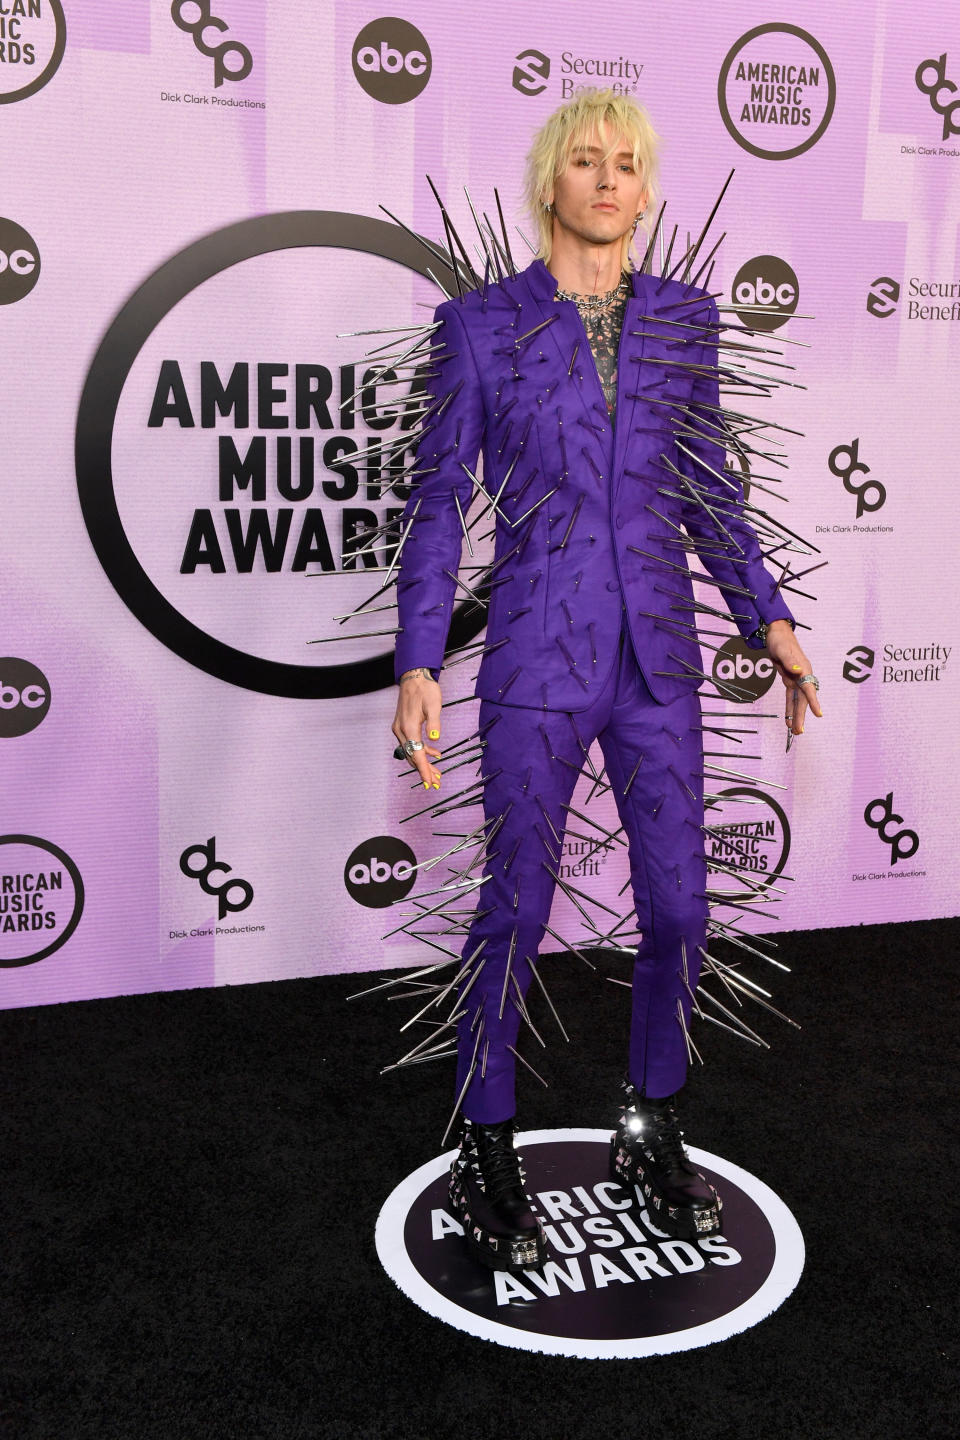 Machine poses in his very spiked suit